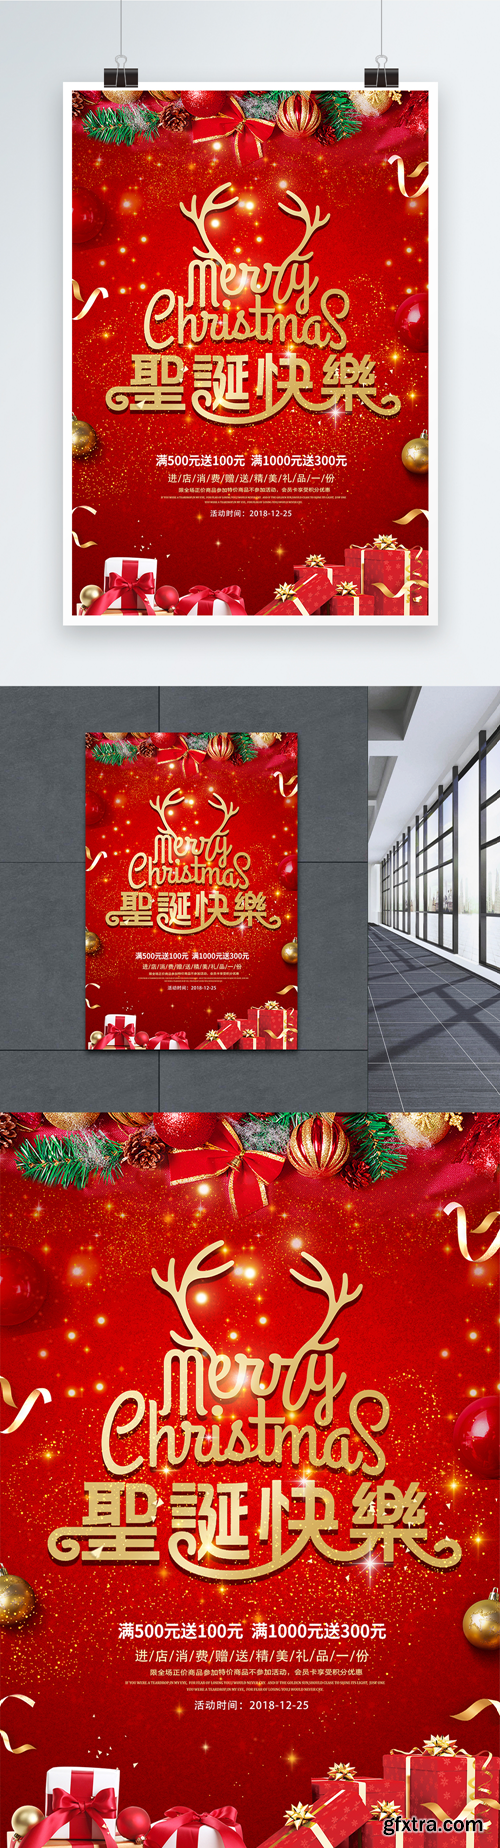 red and gold style christmas poster